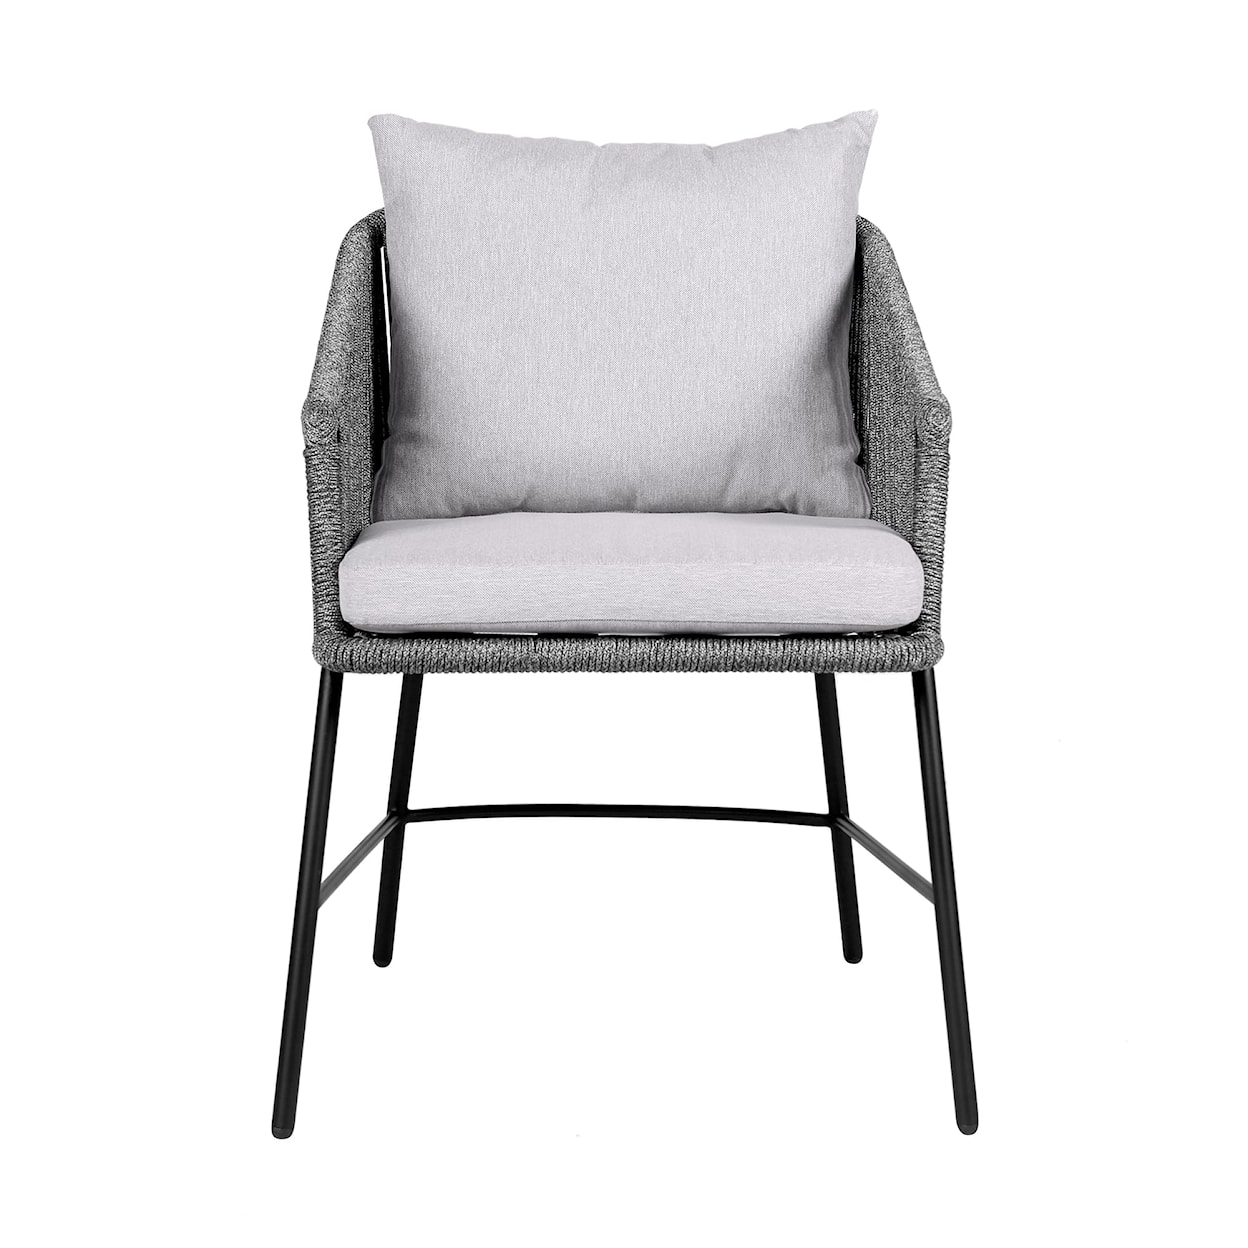 Armen Living Calica Outdoor Dining Chair